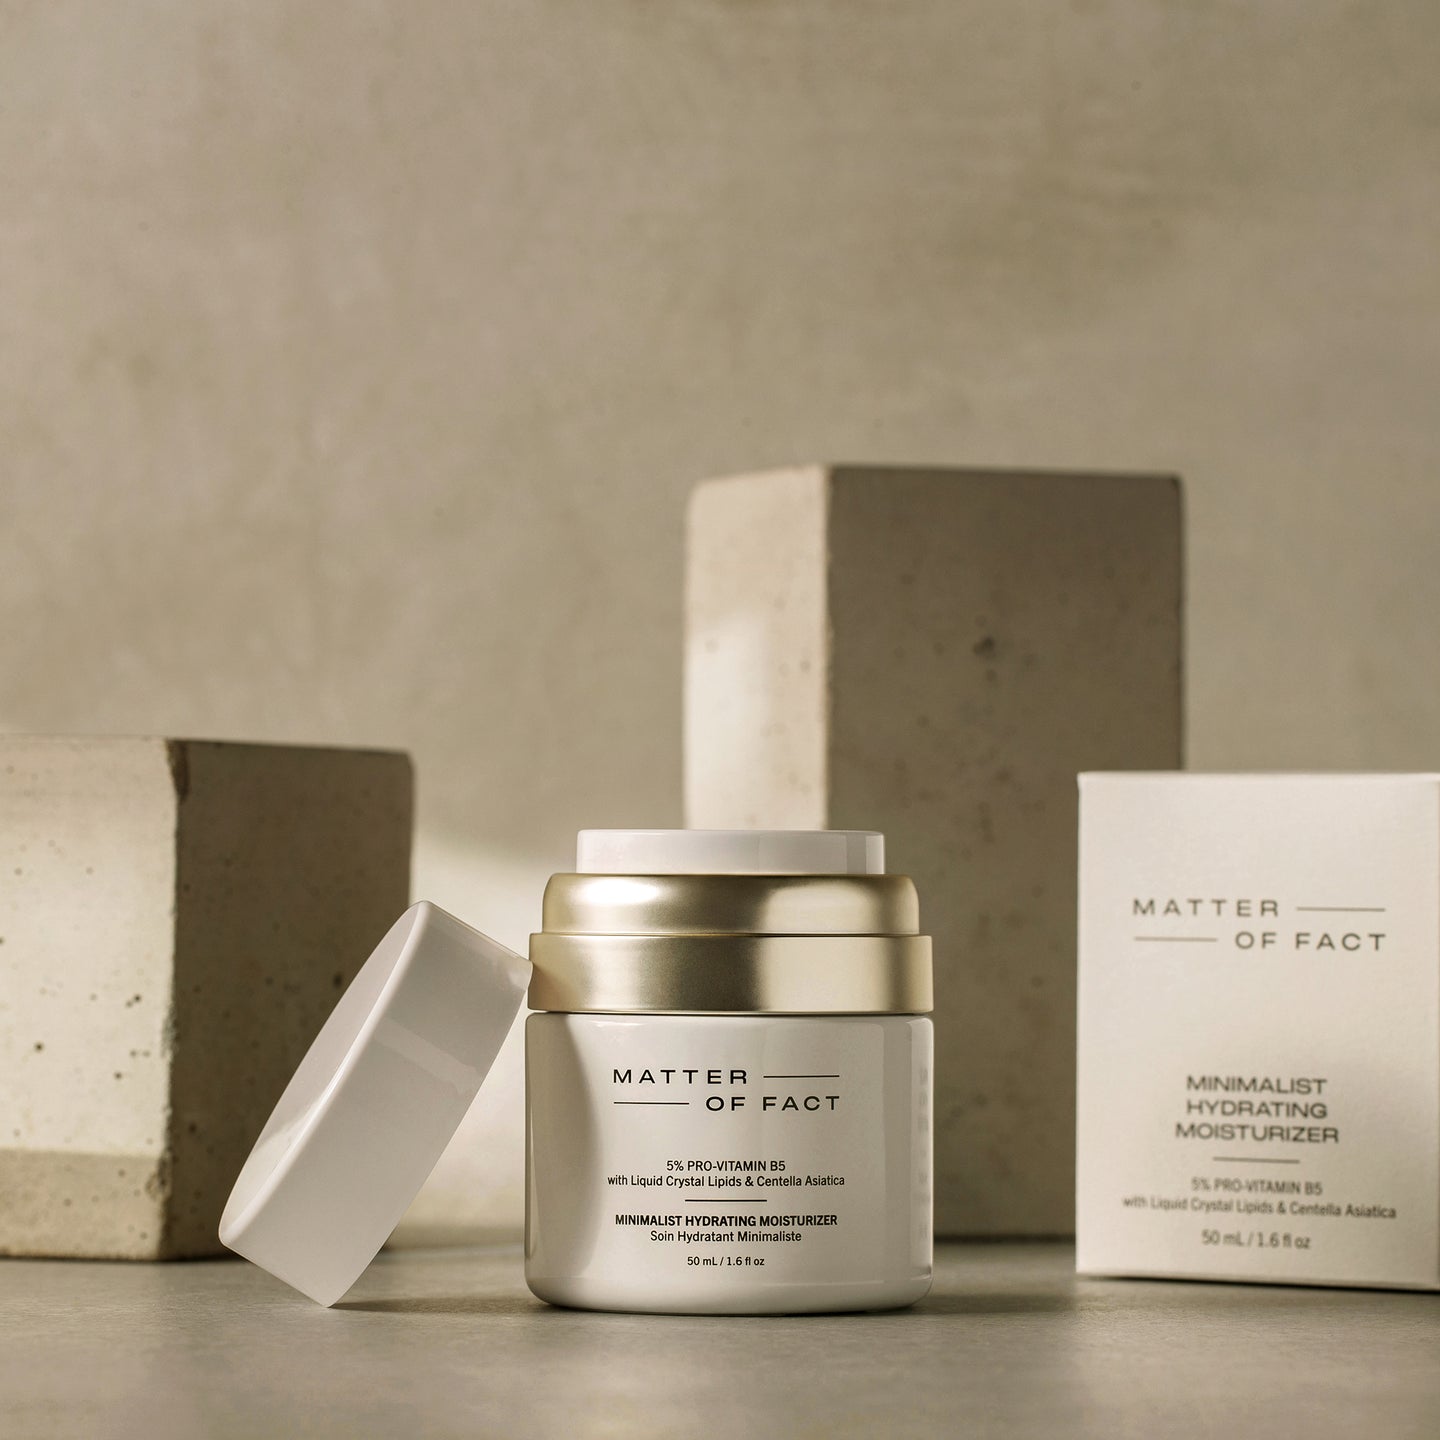 MATTER OF FACT SKINCARE MINIMALIST HYDRATING MOISTURIZER product vessel on a beige background with the product packaging and applicator visible